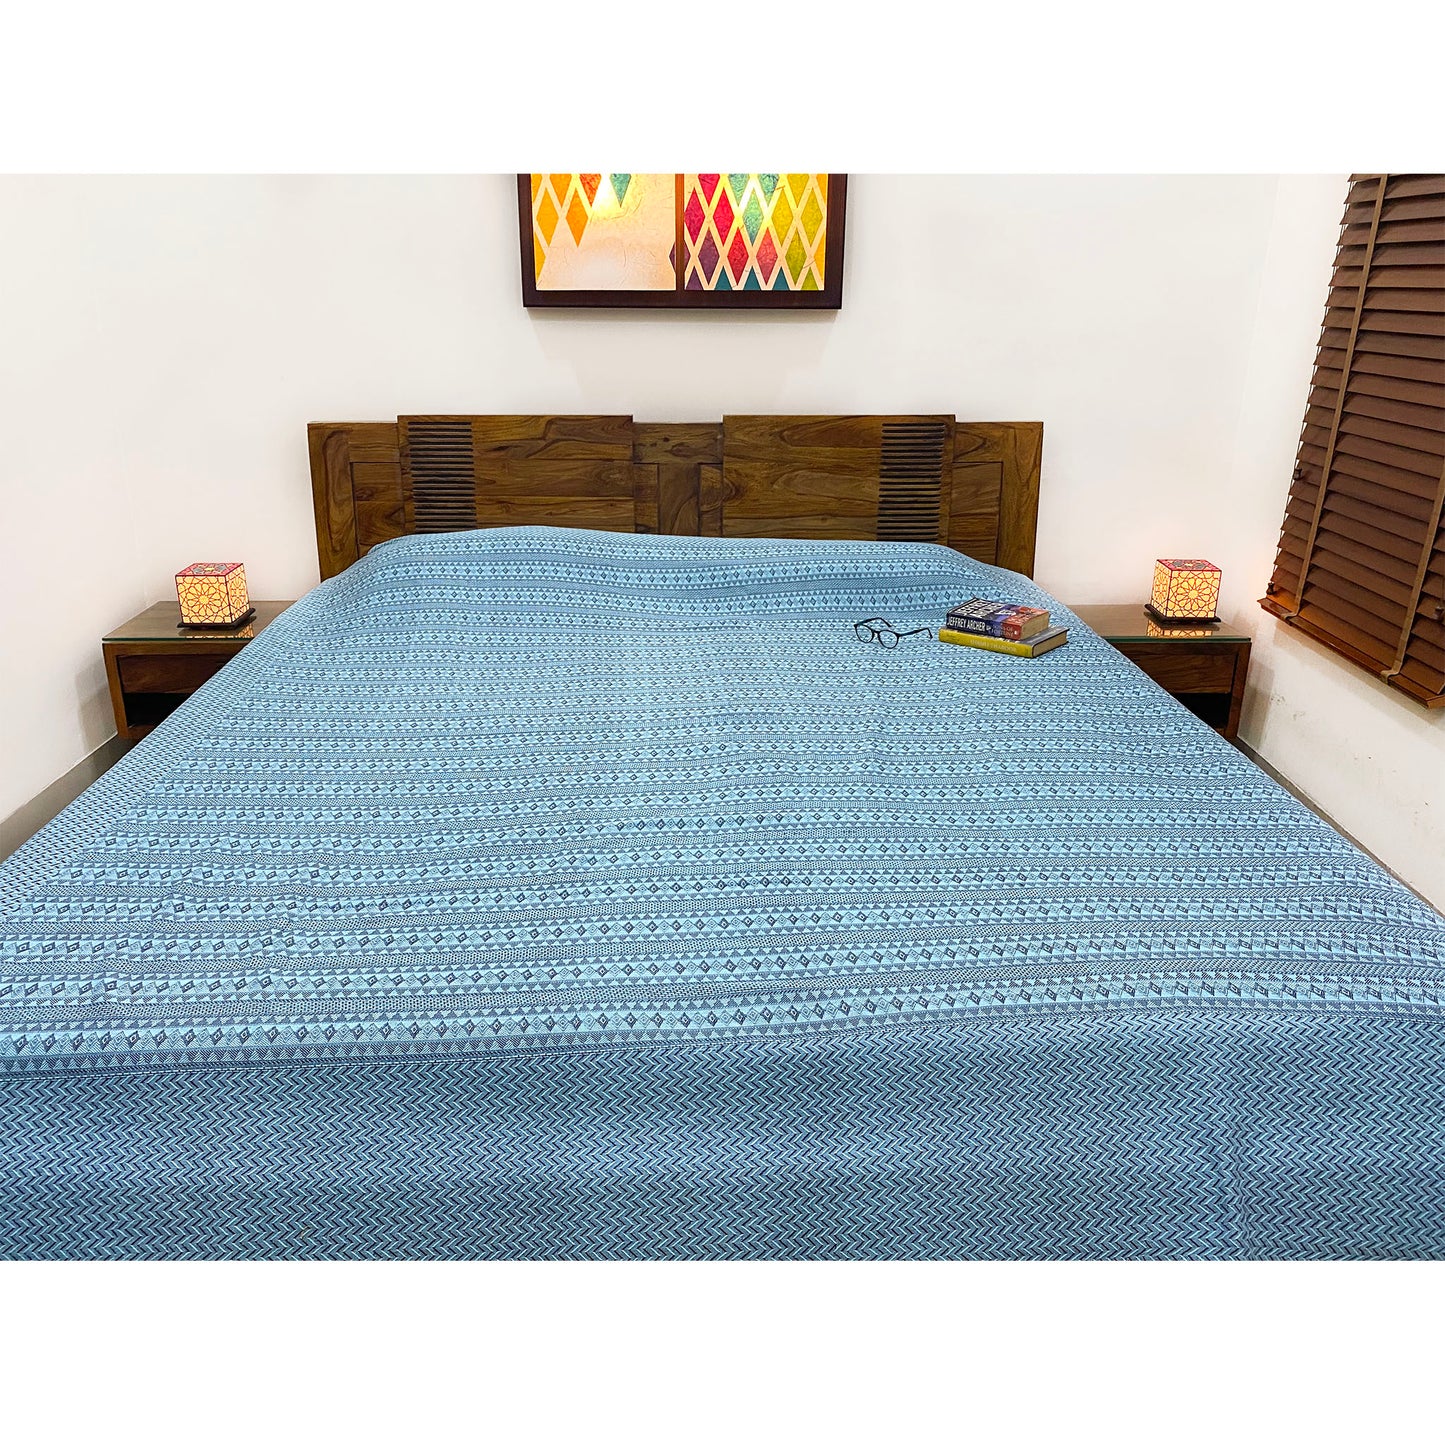 Intricately Woven Handloom Bed  Cover